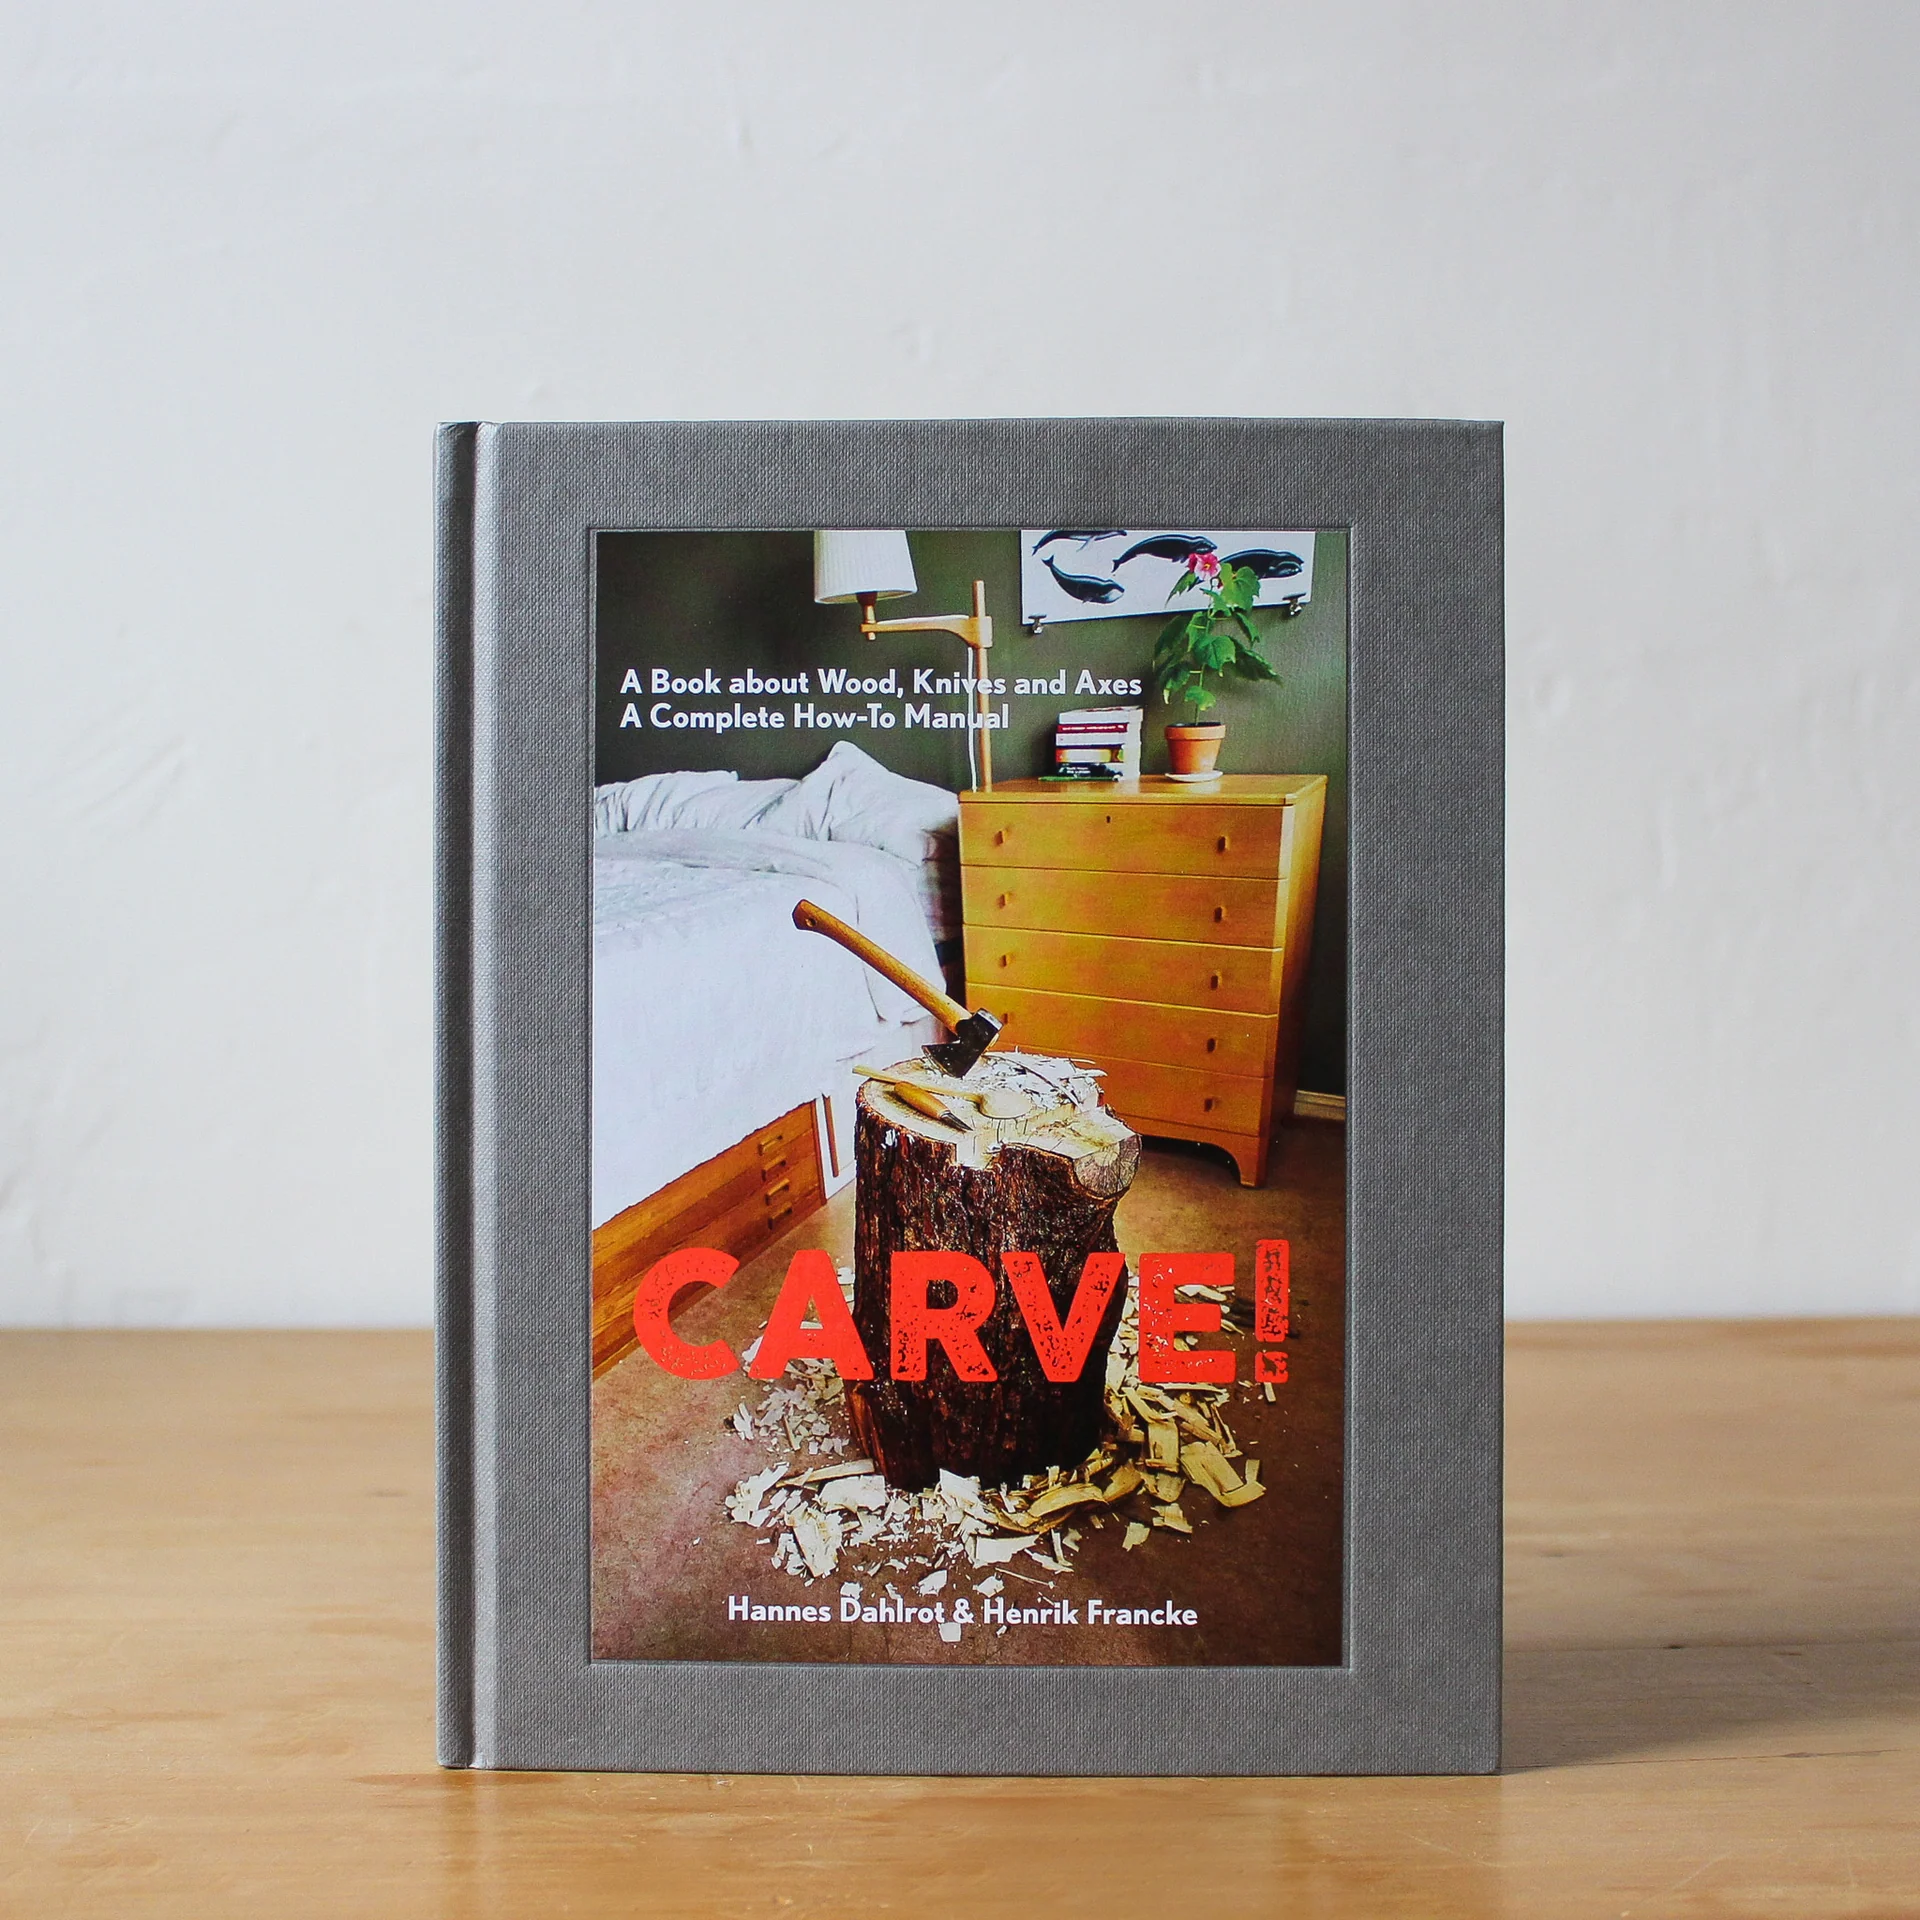 CARVE! A BOOK ON WOOD, KNIVES AND AXES x  Dahlrot Hannes, Francke Henrik